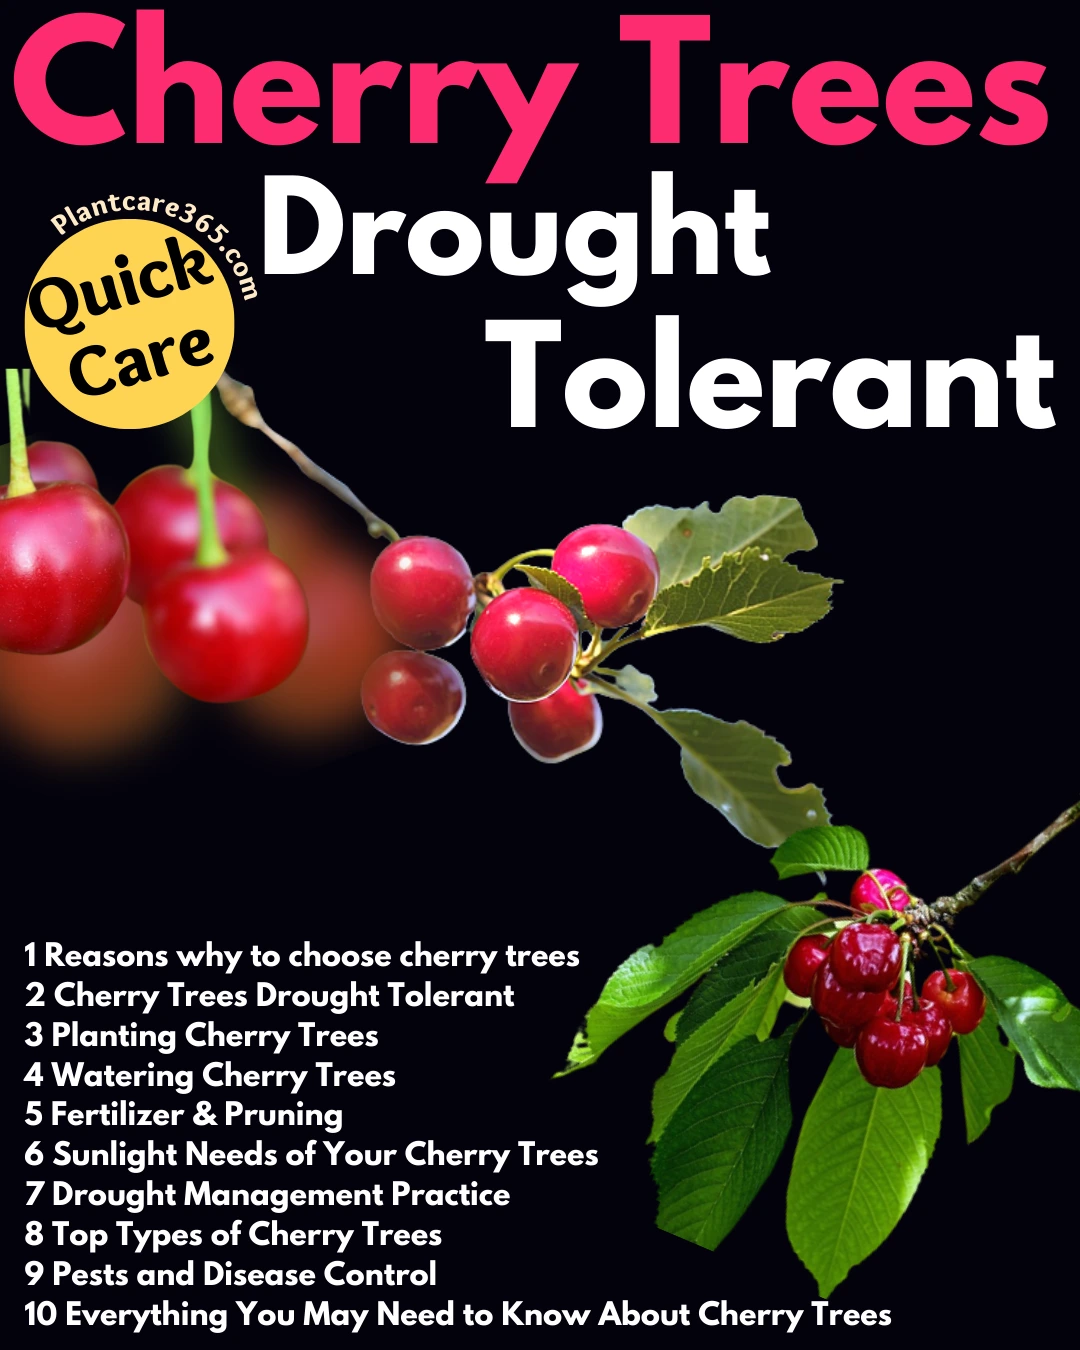 Quick Care Tips on Growing Drought Tolerant Cherry Trees